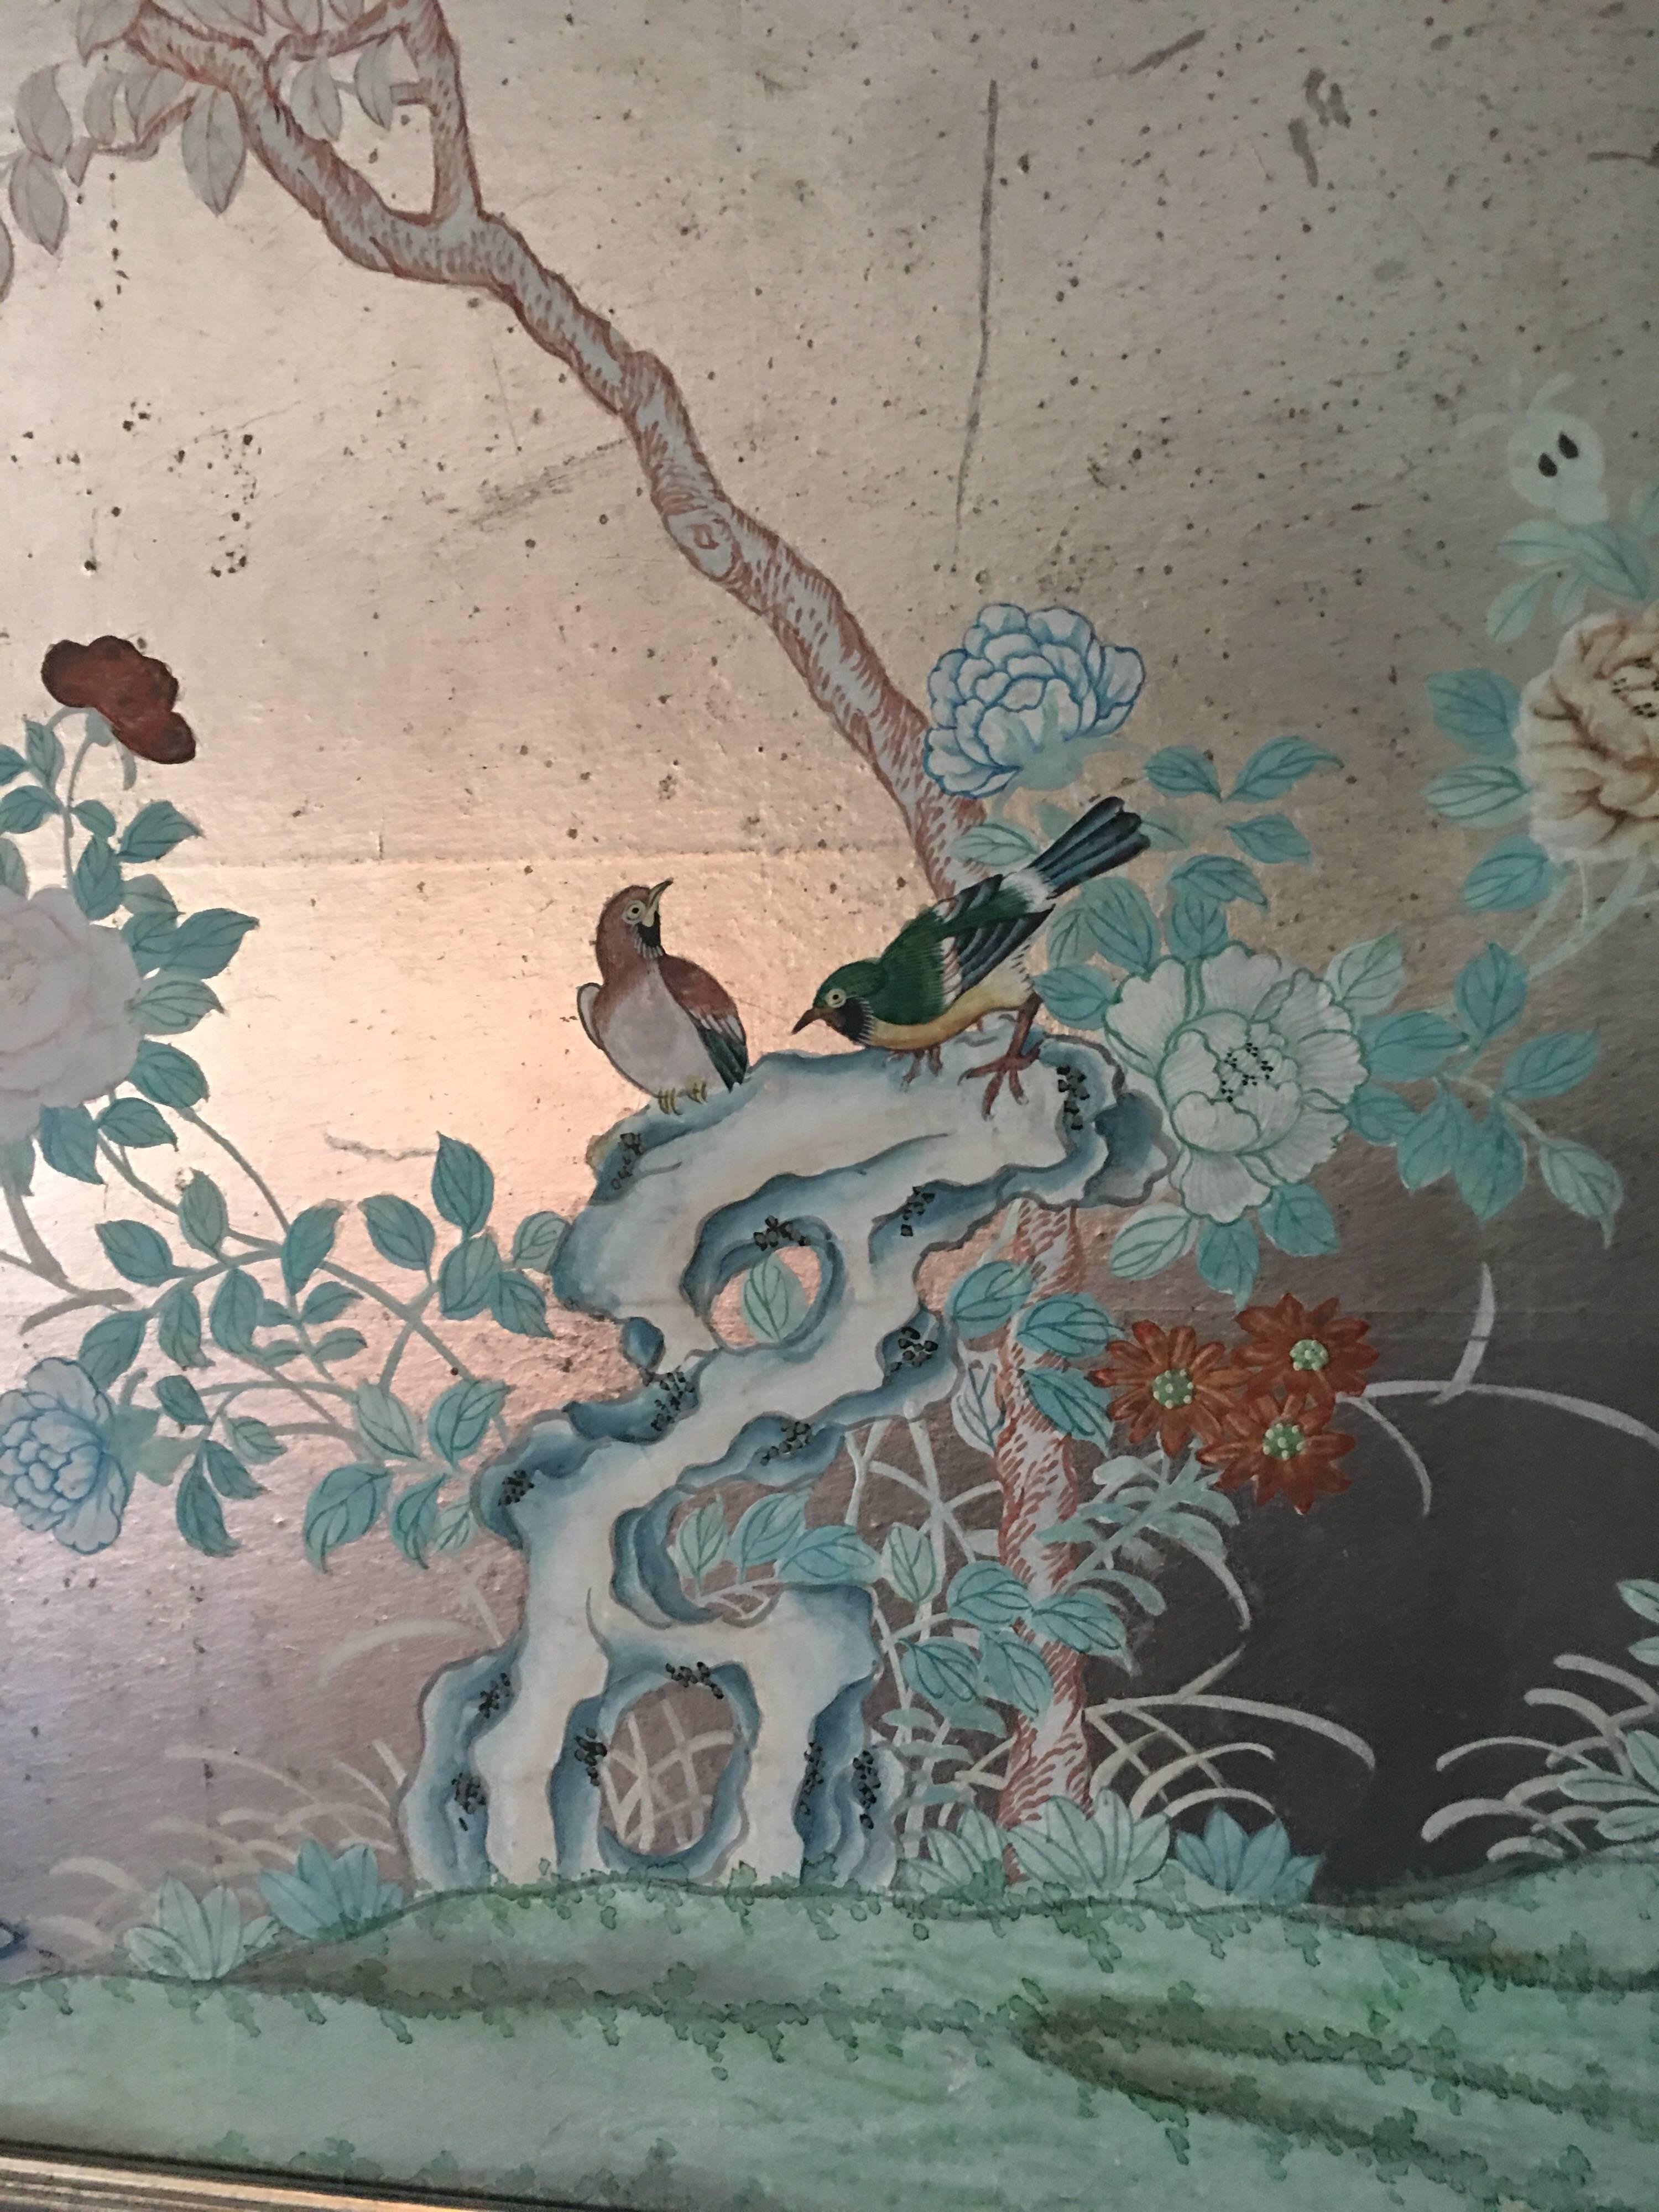 1930s silver chinoiserie wallpaper remnant will hand-painted scene of birds and trees. Newly custom framed in silver leaf frame with low glare glass.